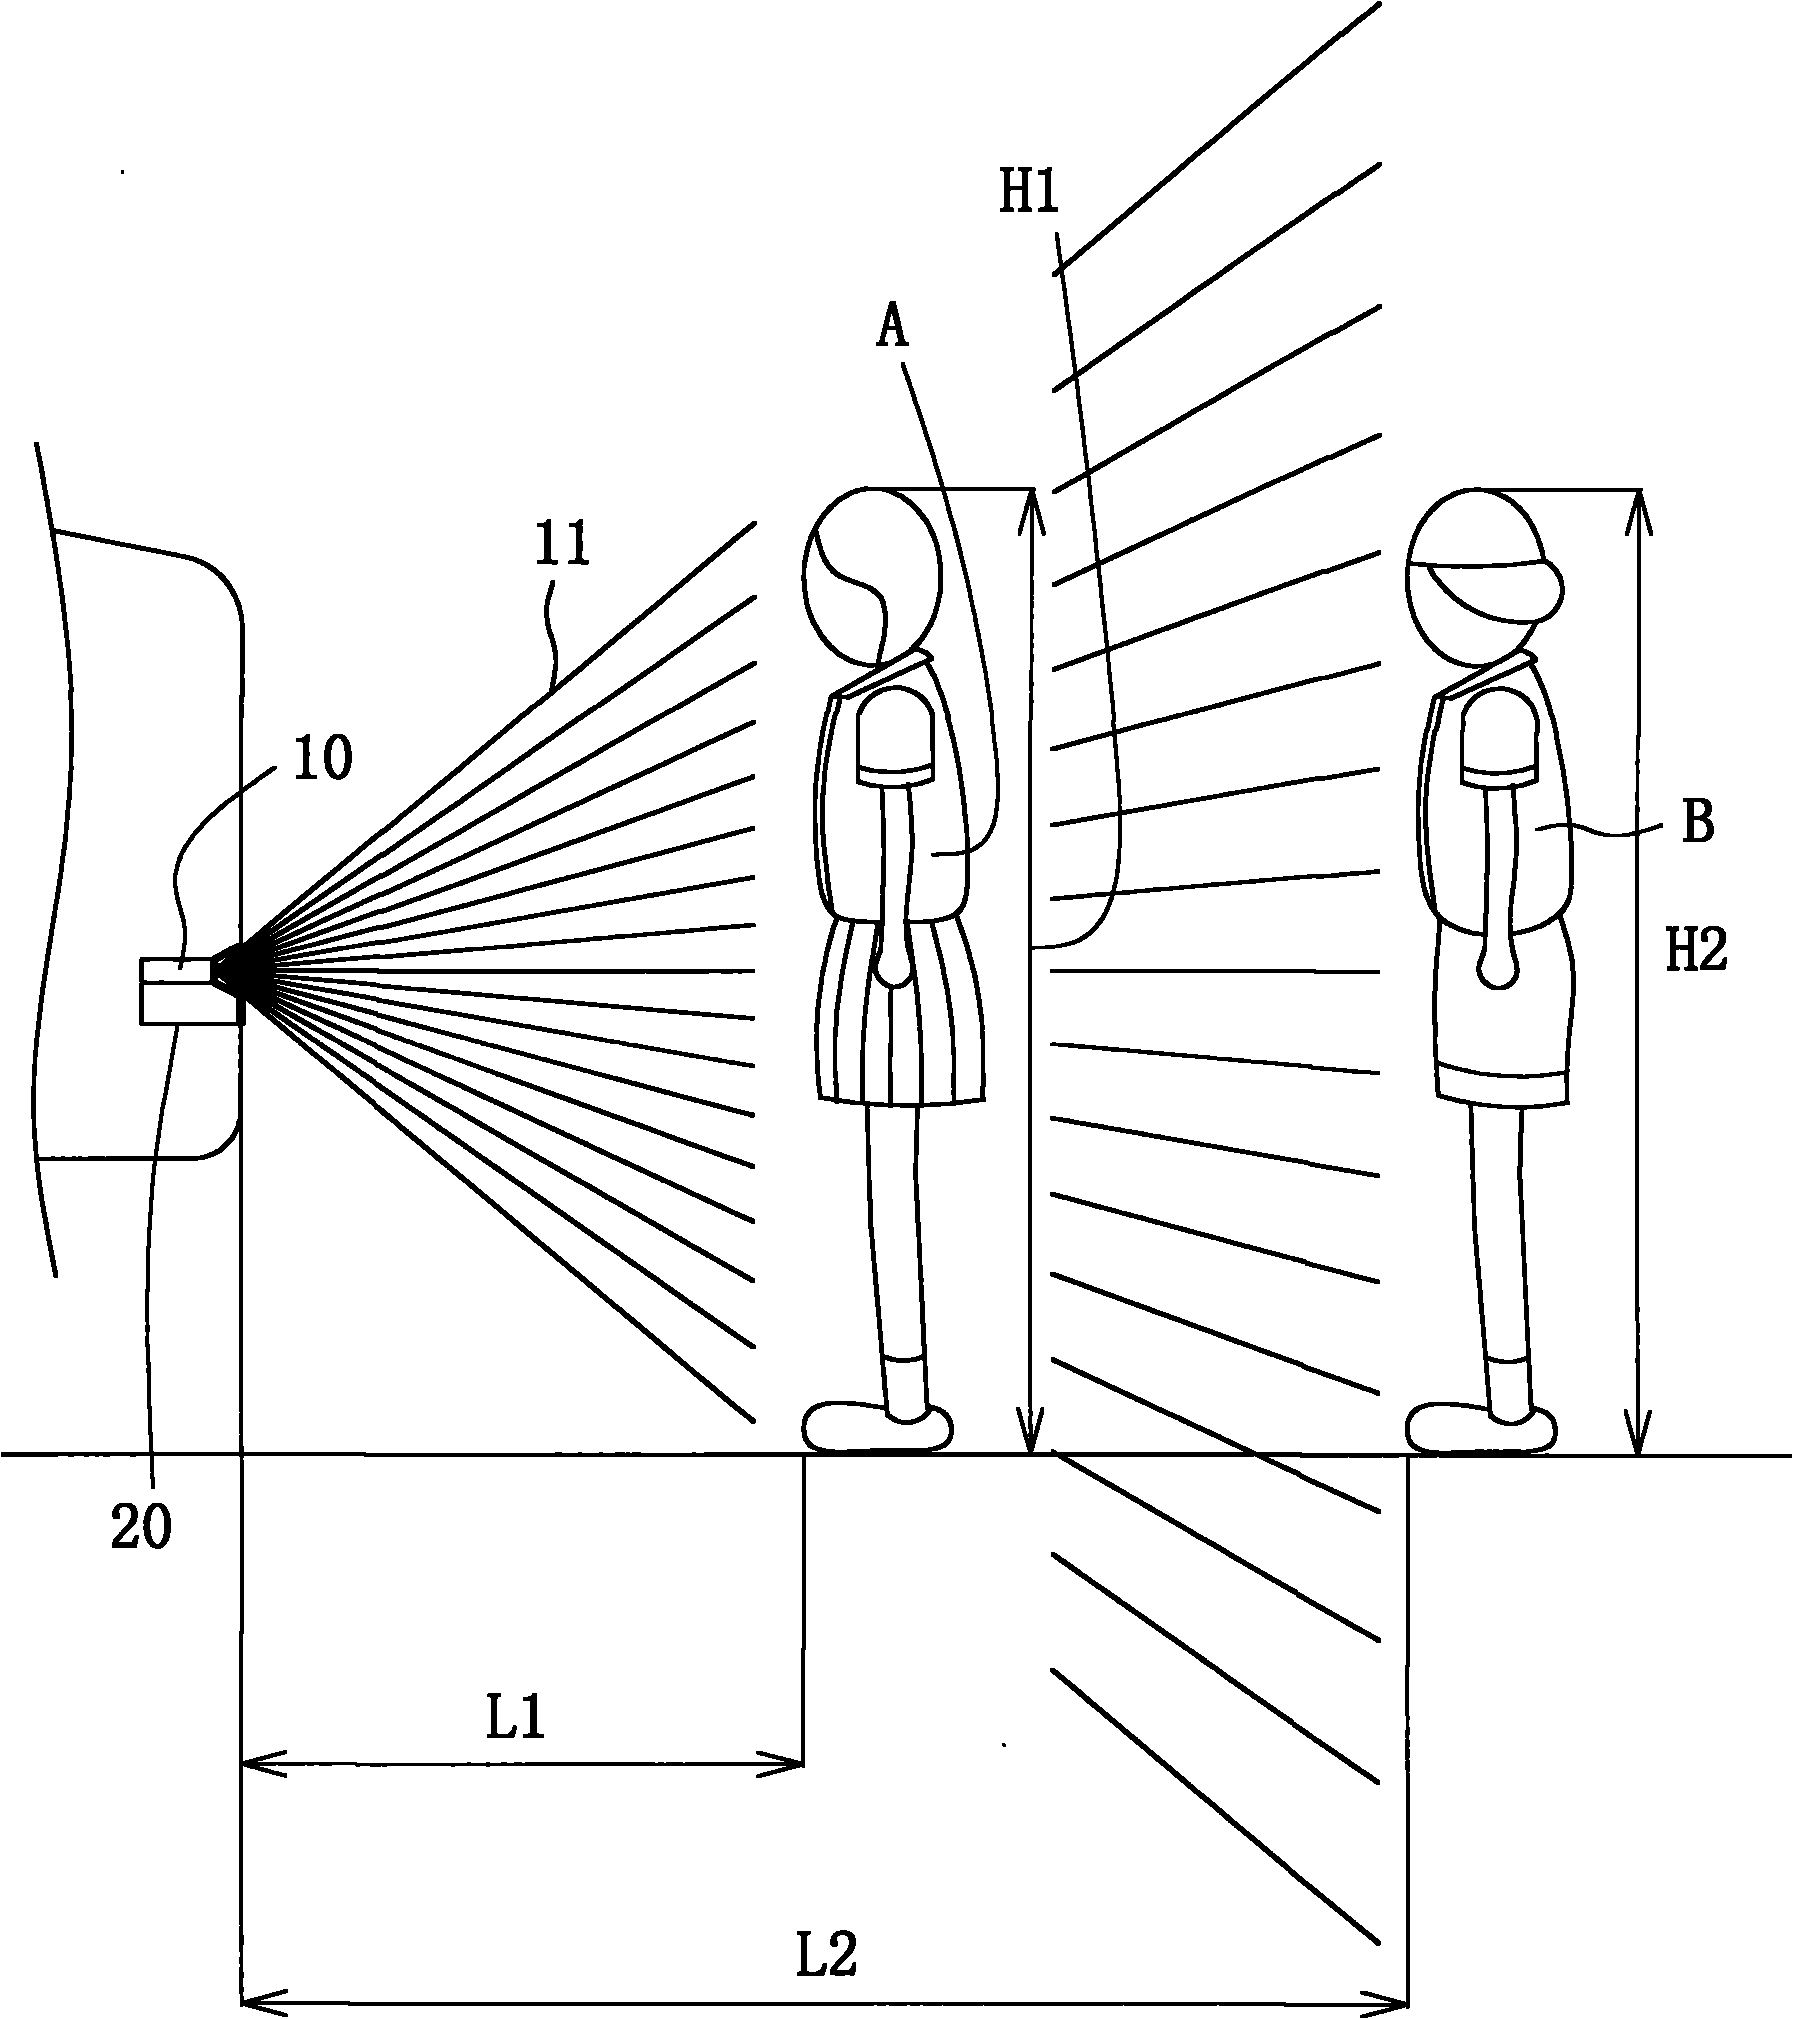 Reverse image device with ranging function